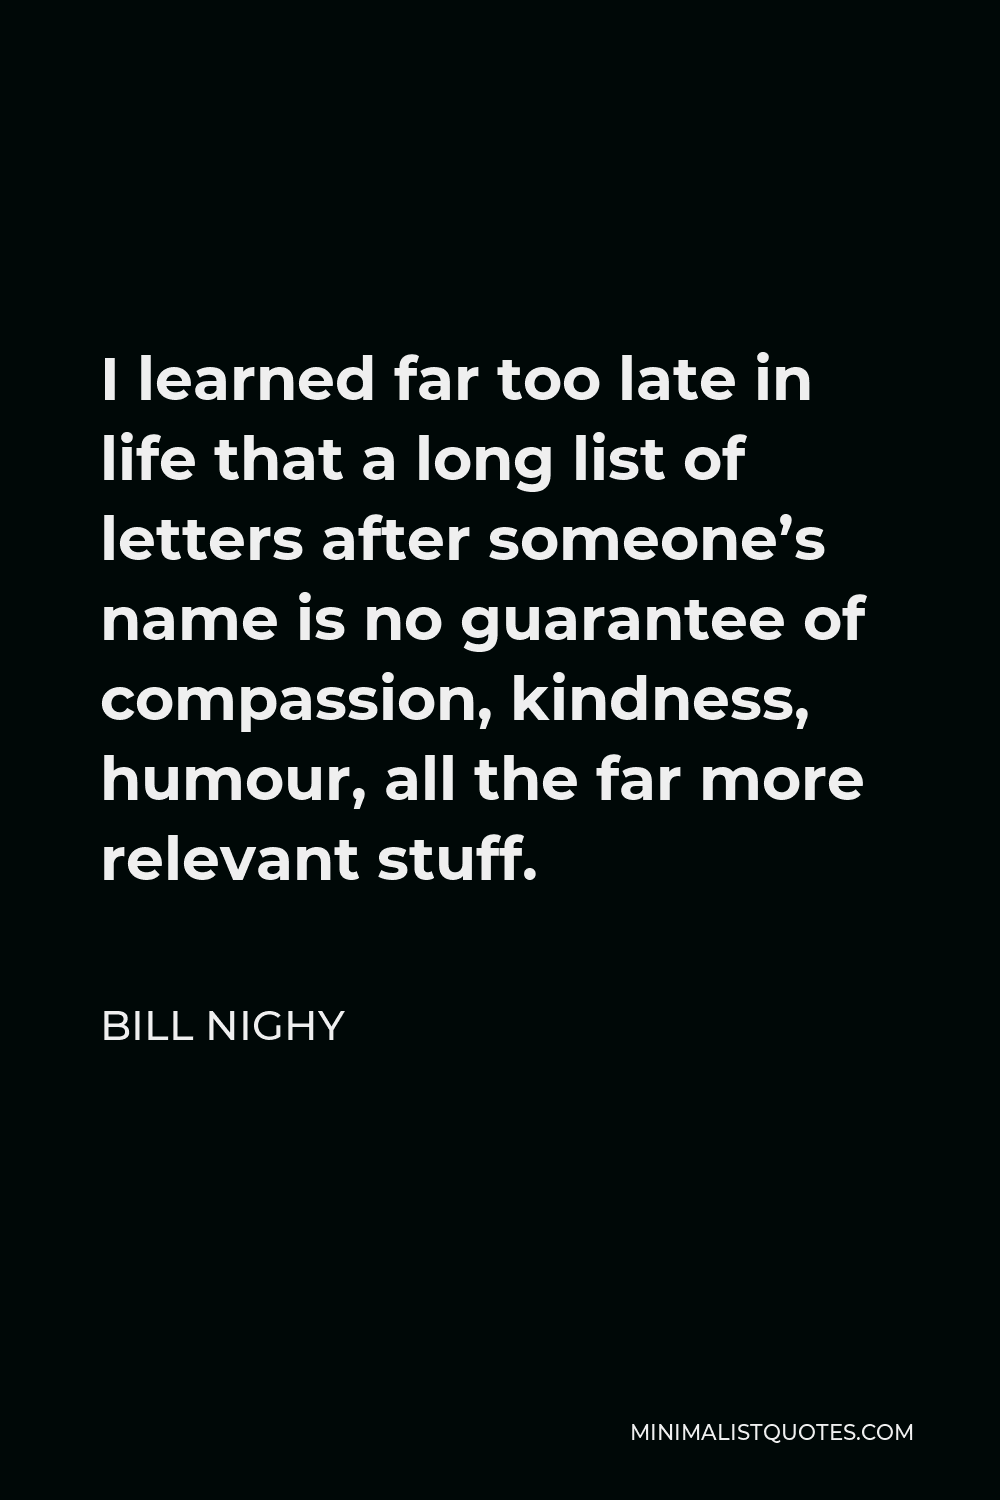 Bill Nighy Quote - I learned far too late in life that a long list of letters after someone’s name is no guarantee of compassion, kindness, humour, all the far more relevant stuff.